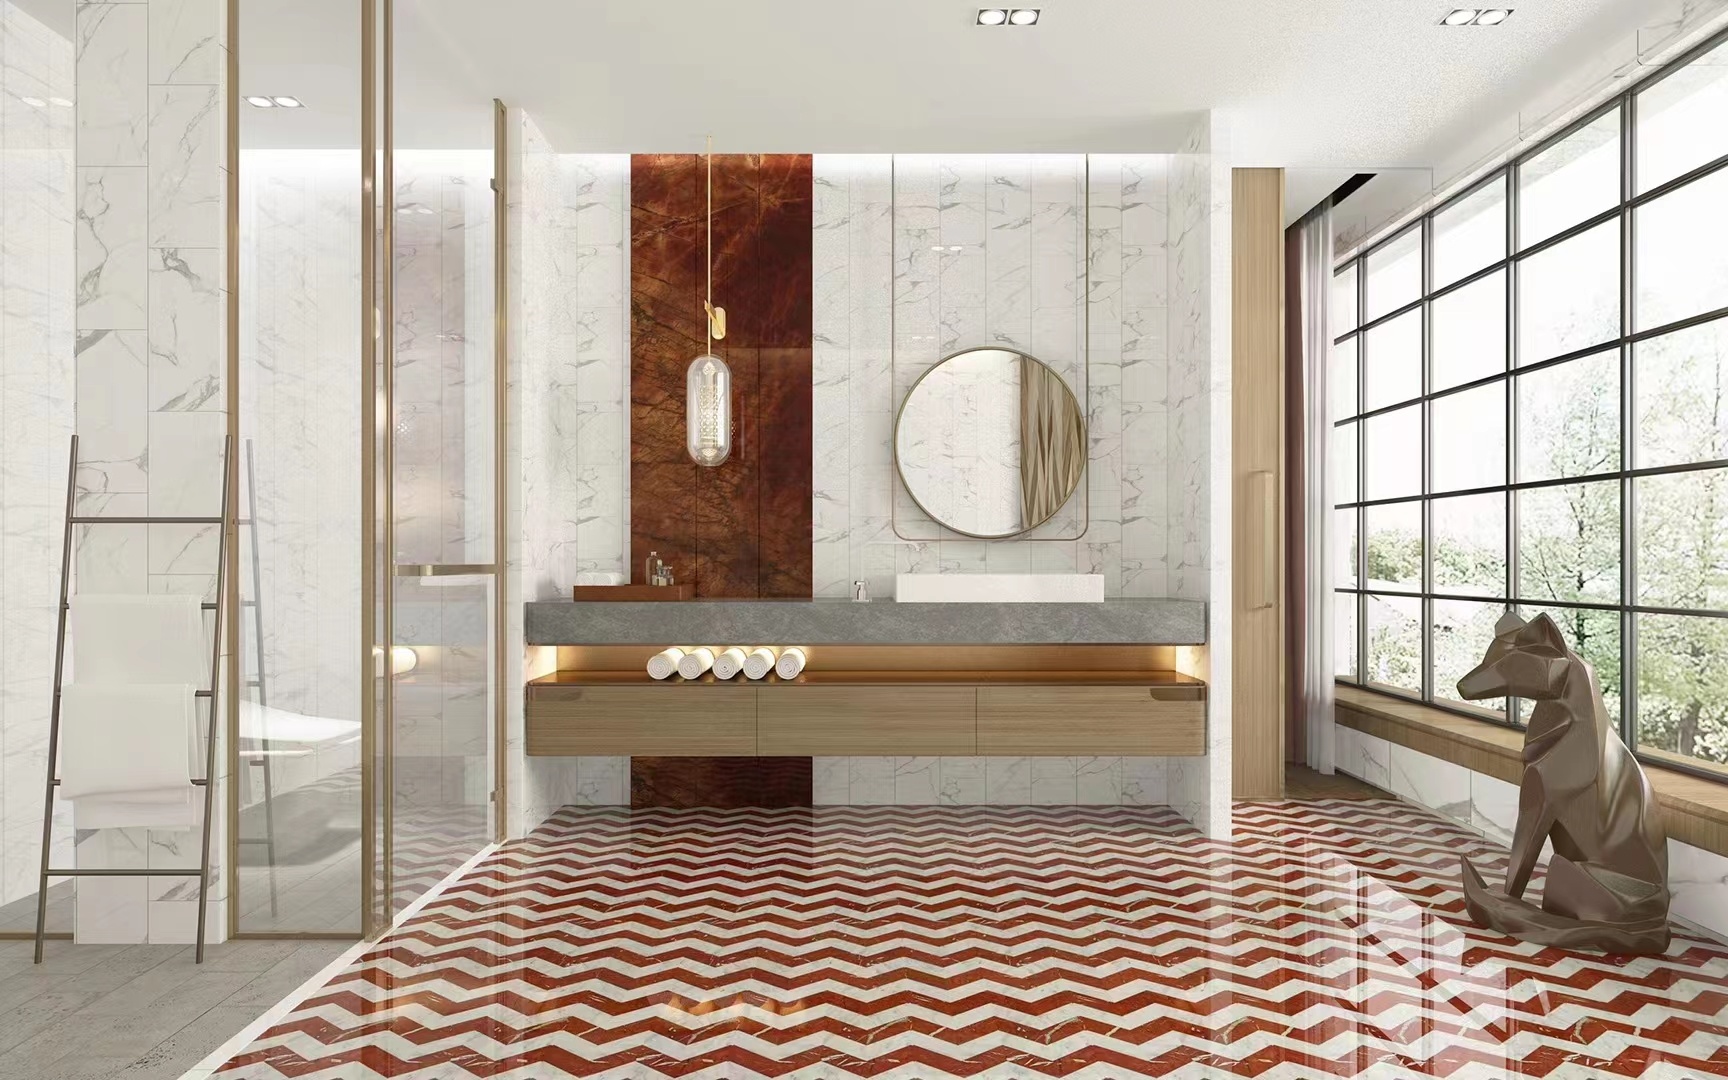 The Art of Enhancing Spaces Mosaic Tile Sheets as a Design Element